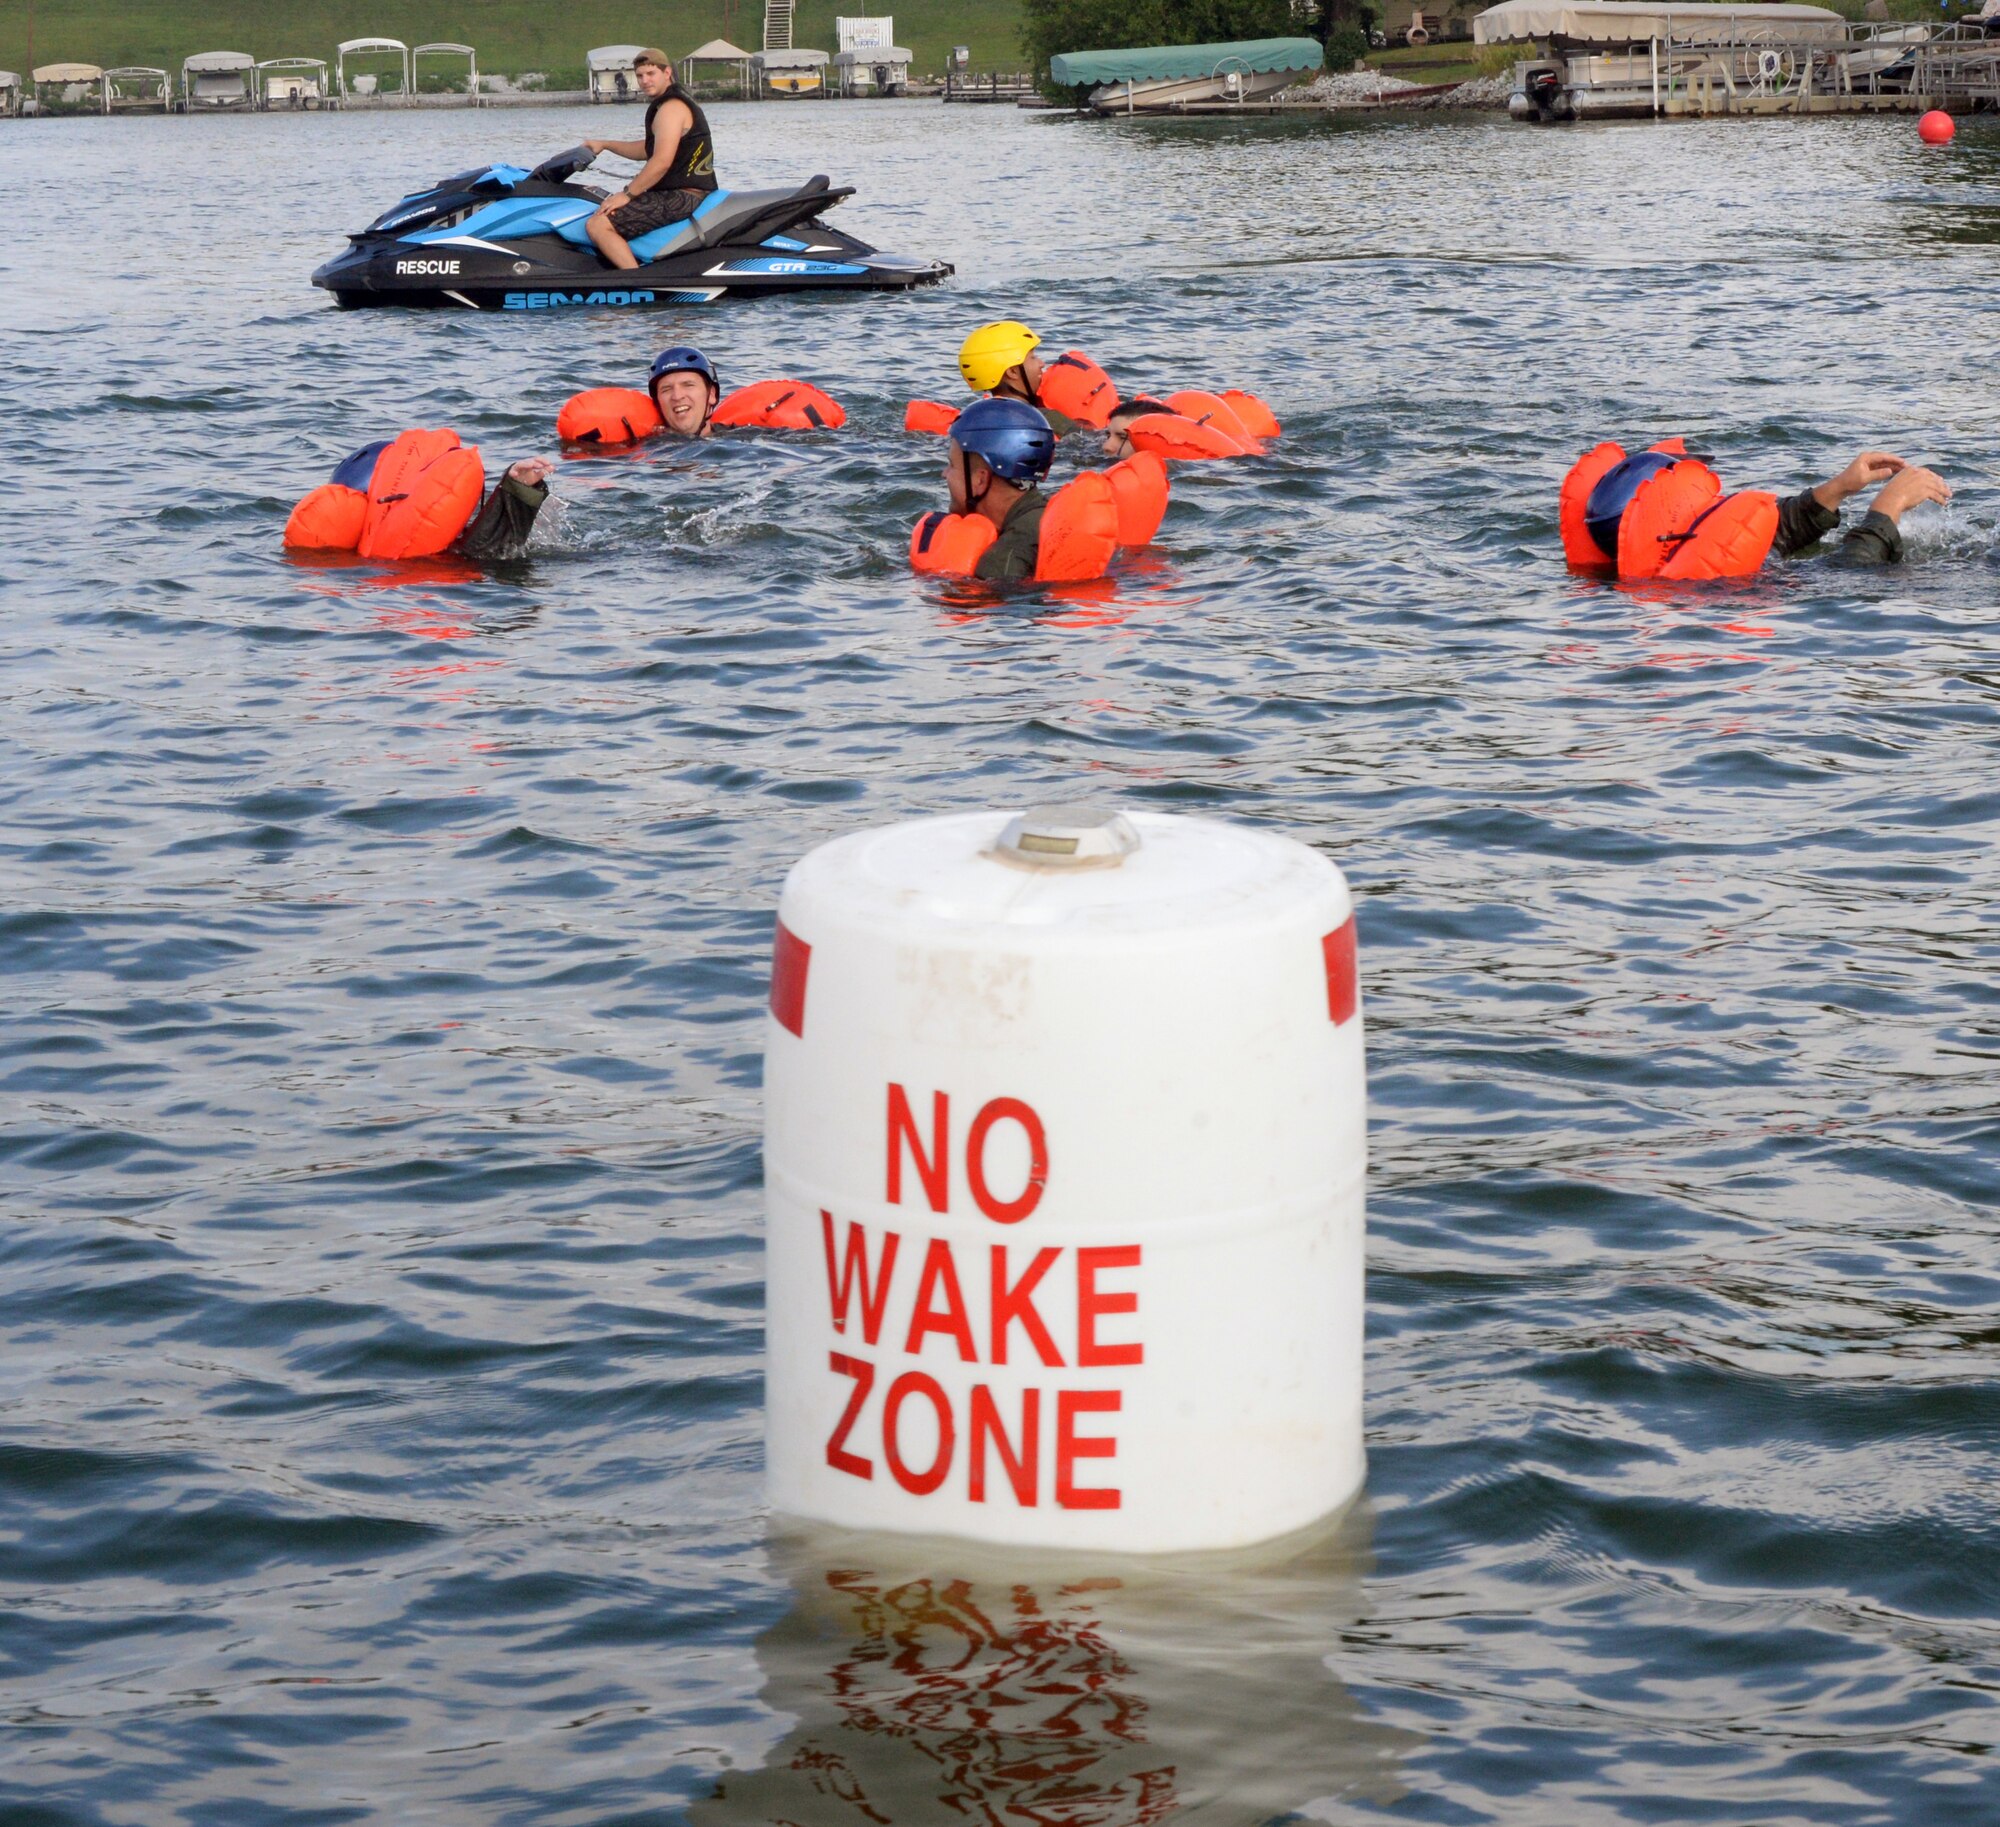 Citizen Airmen, assigned to the 170th Group at Offutt Air Force Base, Nebraska, swim toward a raft under the watchful eye of Staff Sgt. Kevin Battista, 55th Operational Support Squadron Survival Evasion Resistance Escape specialist, while participating in water survival and rescue training July 14, 2018 during monthly inactive duty training. The hands-on water instruction included donning cold-water exposure suits; inflating and swimming with inflatable life preservers; and boarding and utilizing a 20-person survival raft.